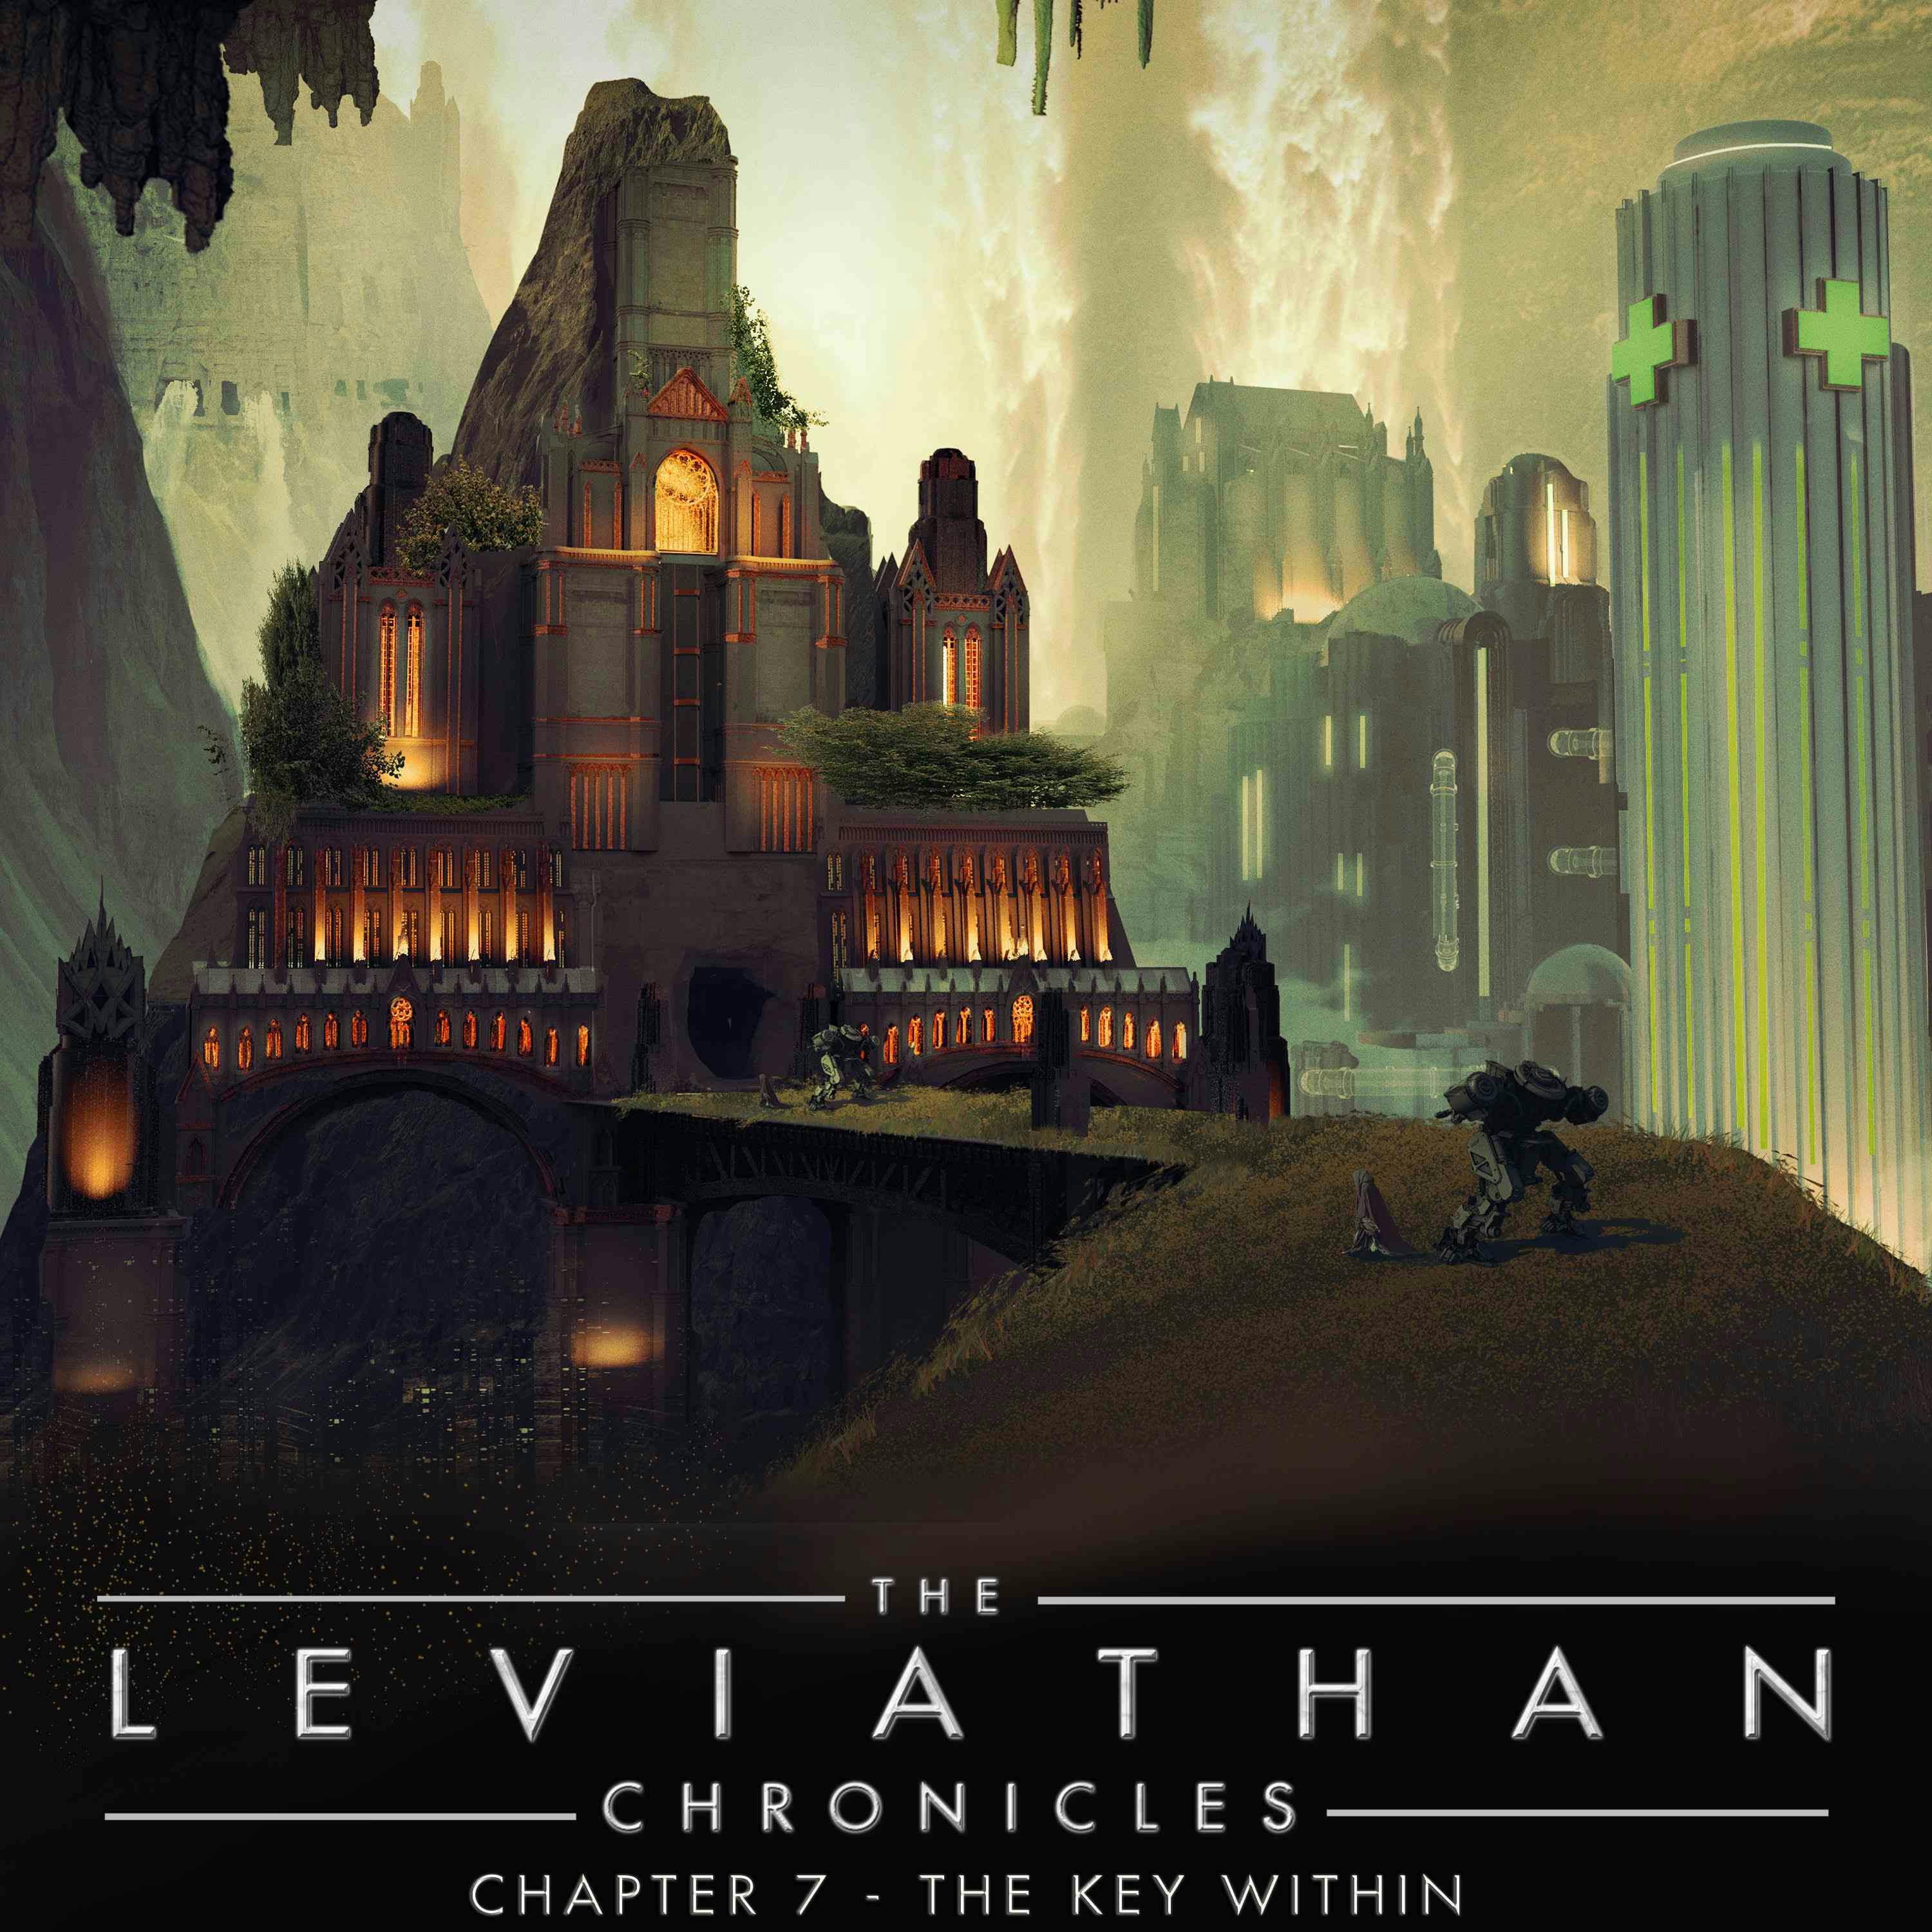 The Leviathan Chronicles | Chapter 7 - The Key Within